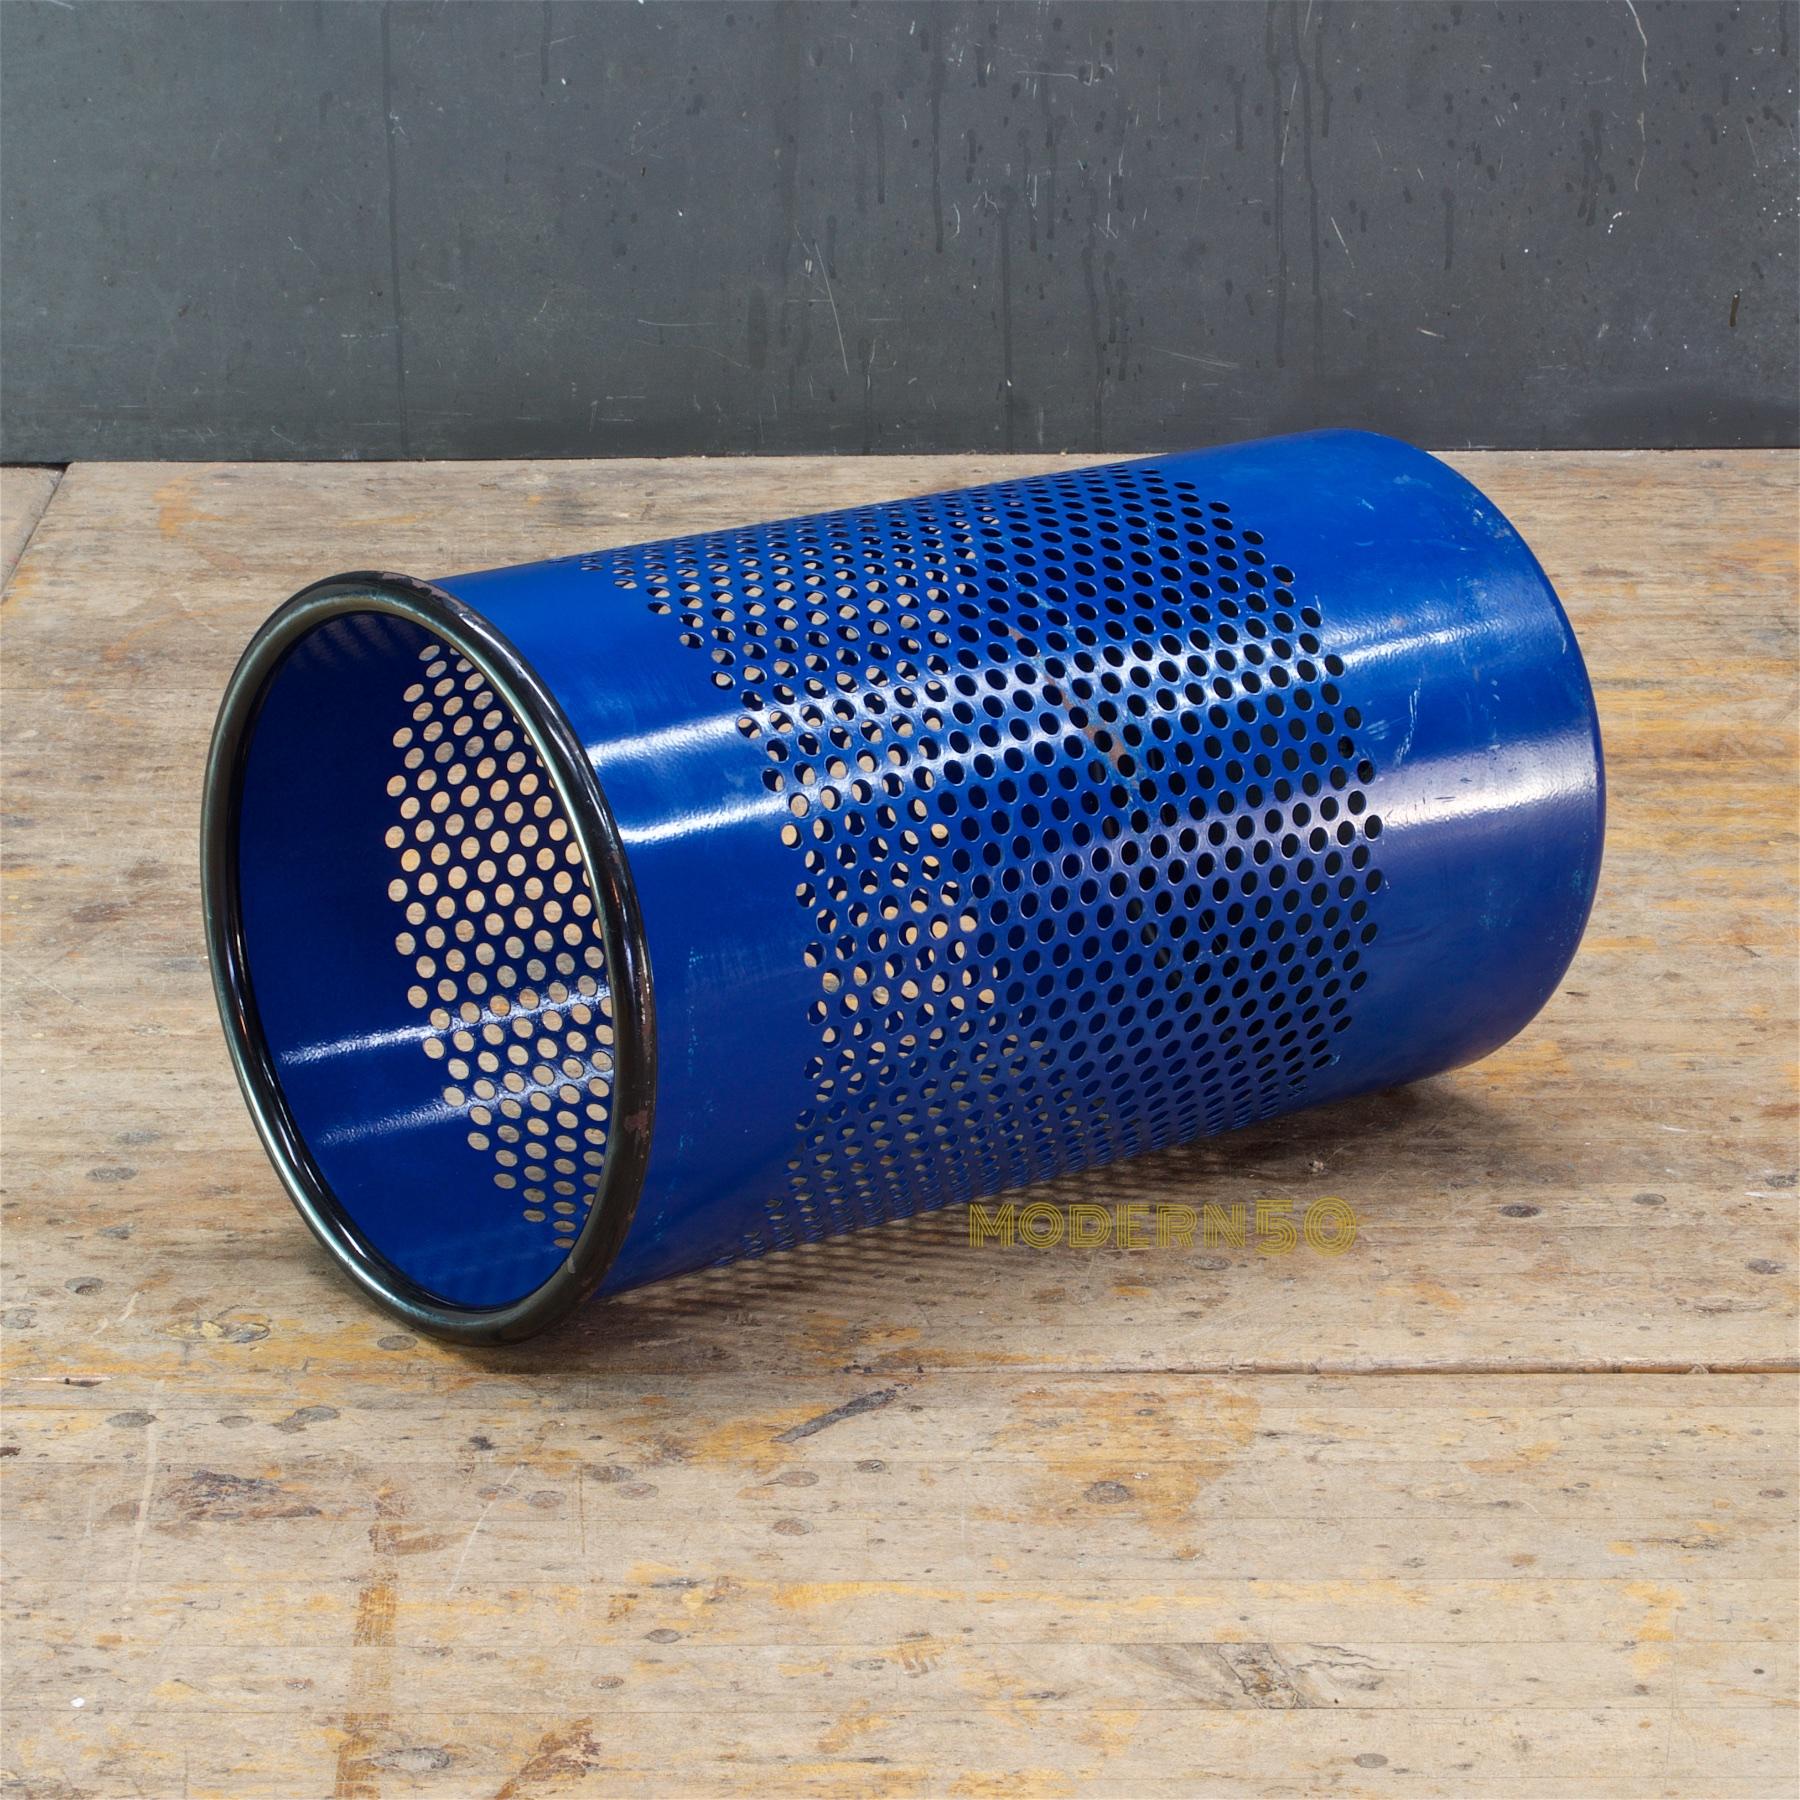 Mid-Century Modern 1980s Blue Perforated Metal Office Wastebasket Trash Can Italy Memphis Sottsass